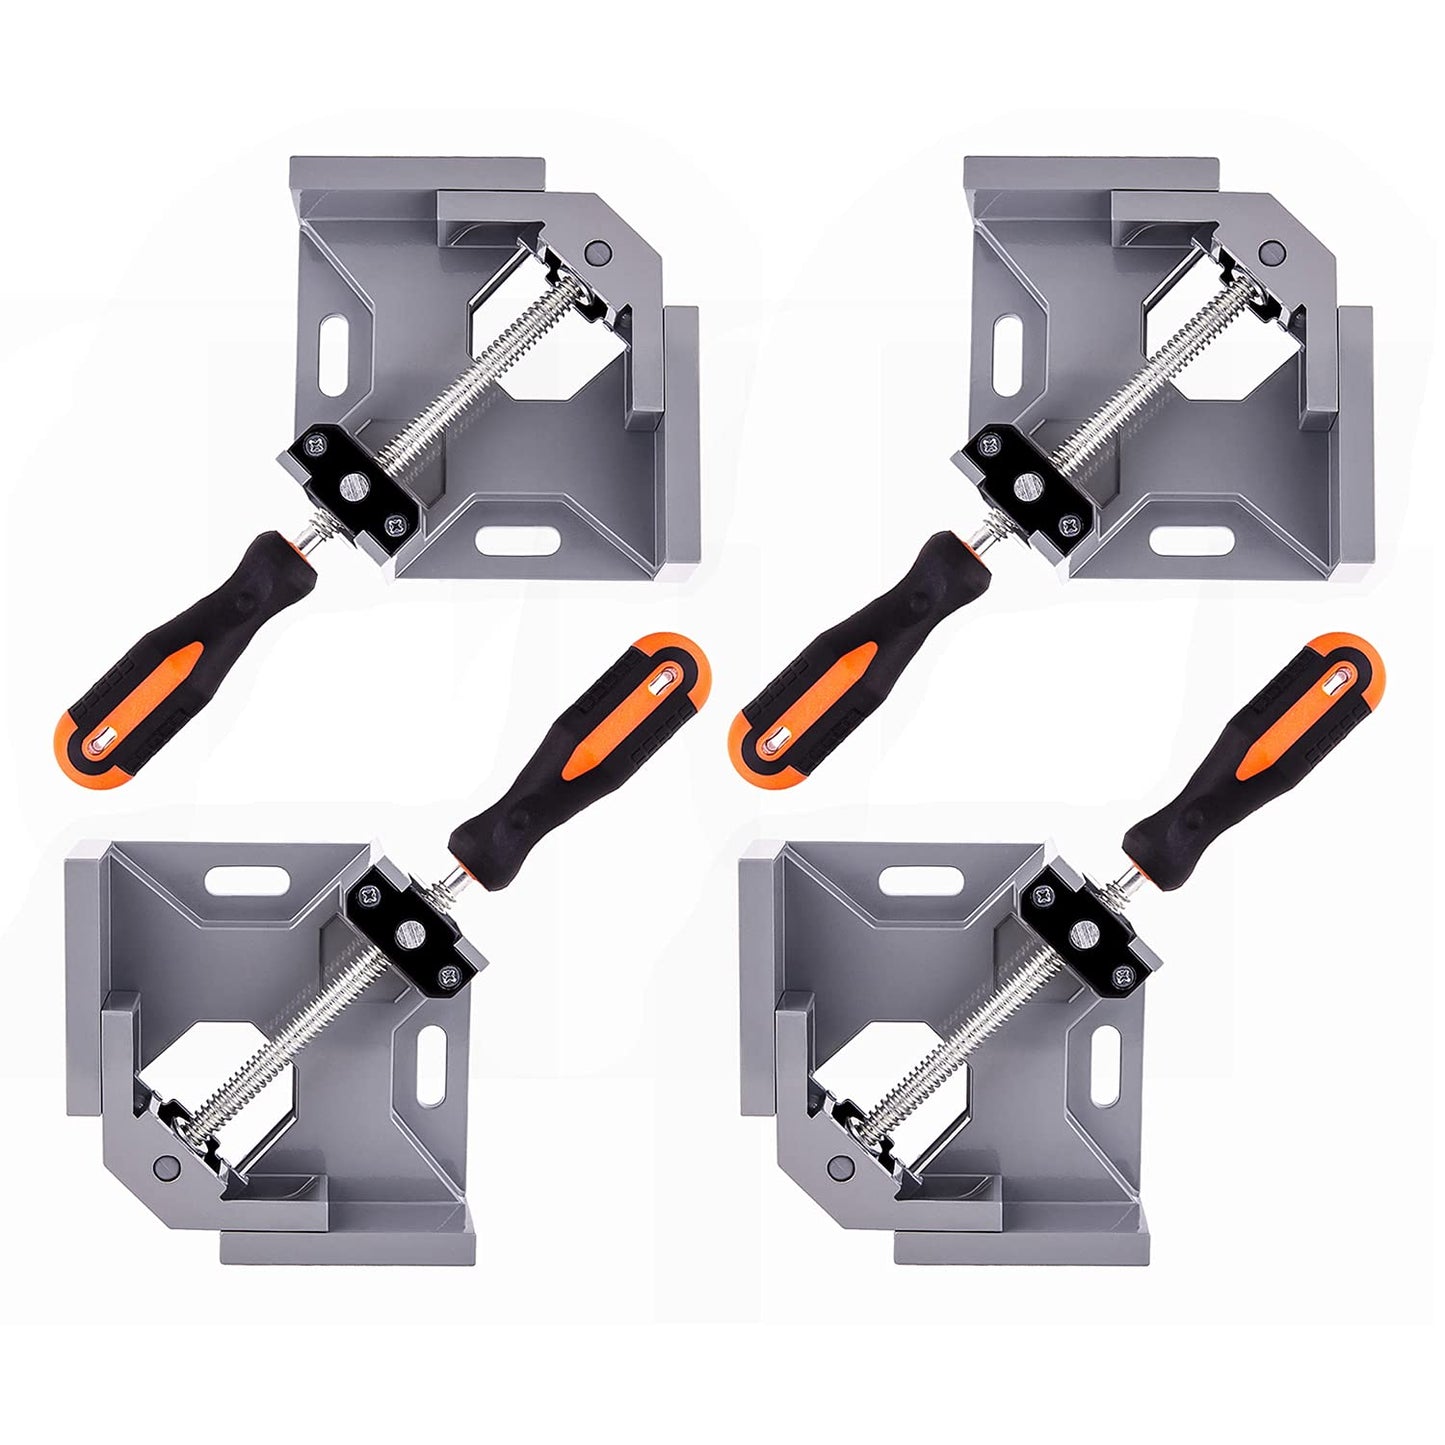 WYQYQ 4pcs Corner Clamp - Right Angle Clamp 90 Degree Wood Clamps For Woodworking, With Adjustable Swing Jaw Aluminum Alloy Frame Clamps, For